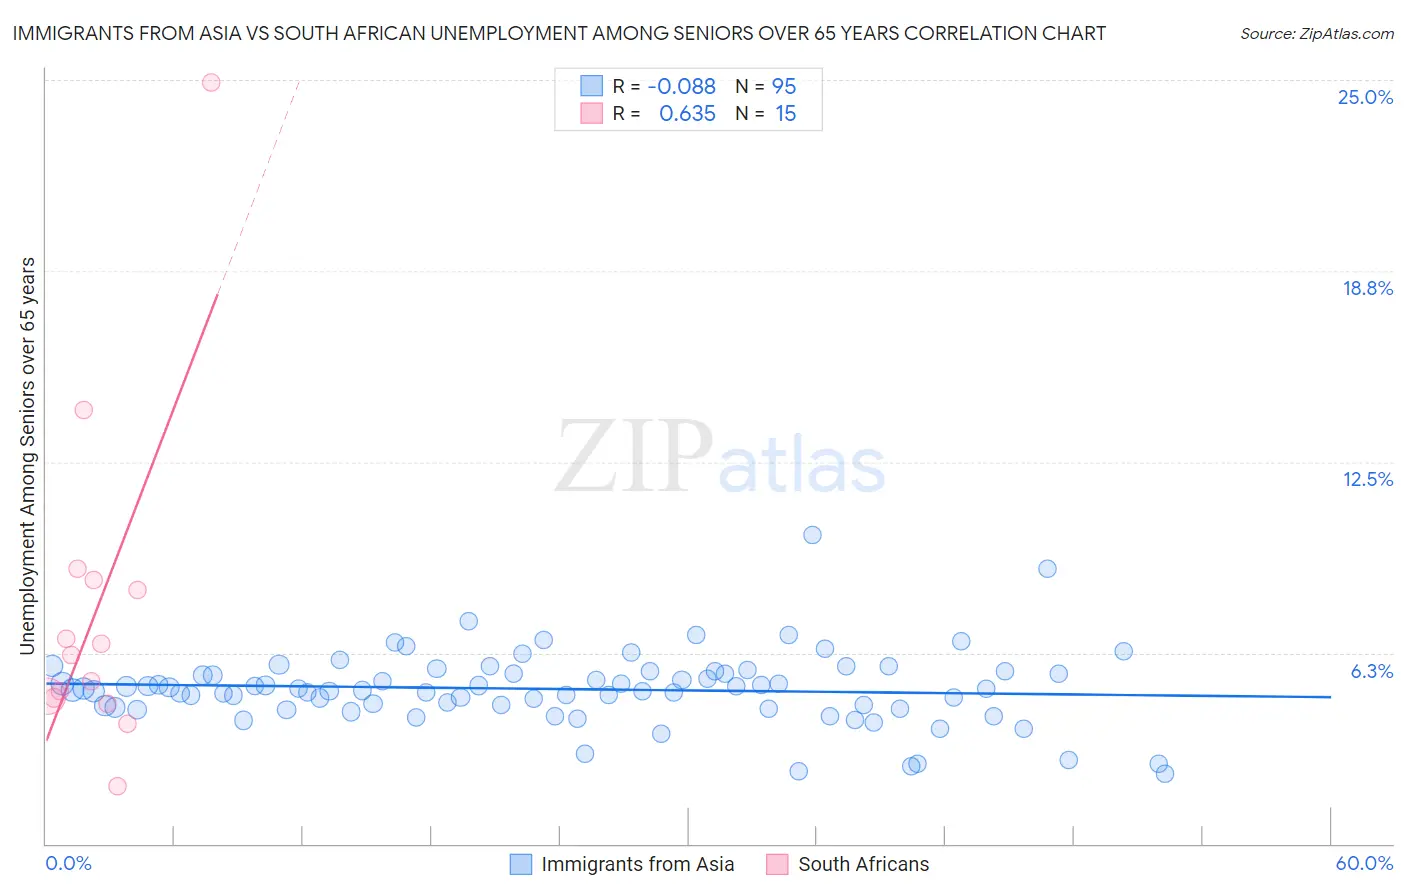 Immigrants from Asia vs South African Unemployment Among Seniors over 65 years